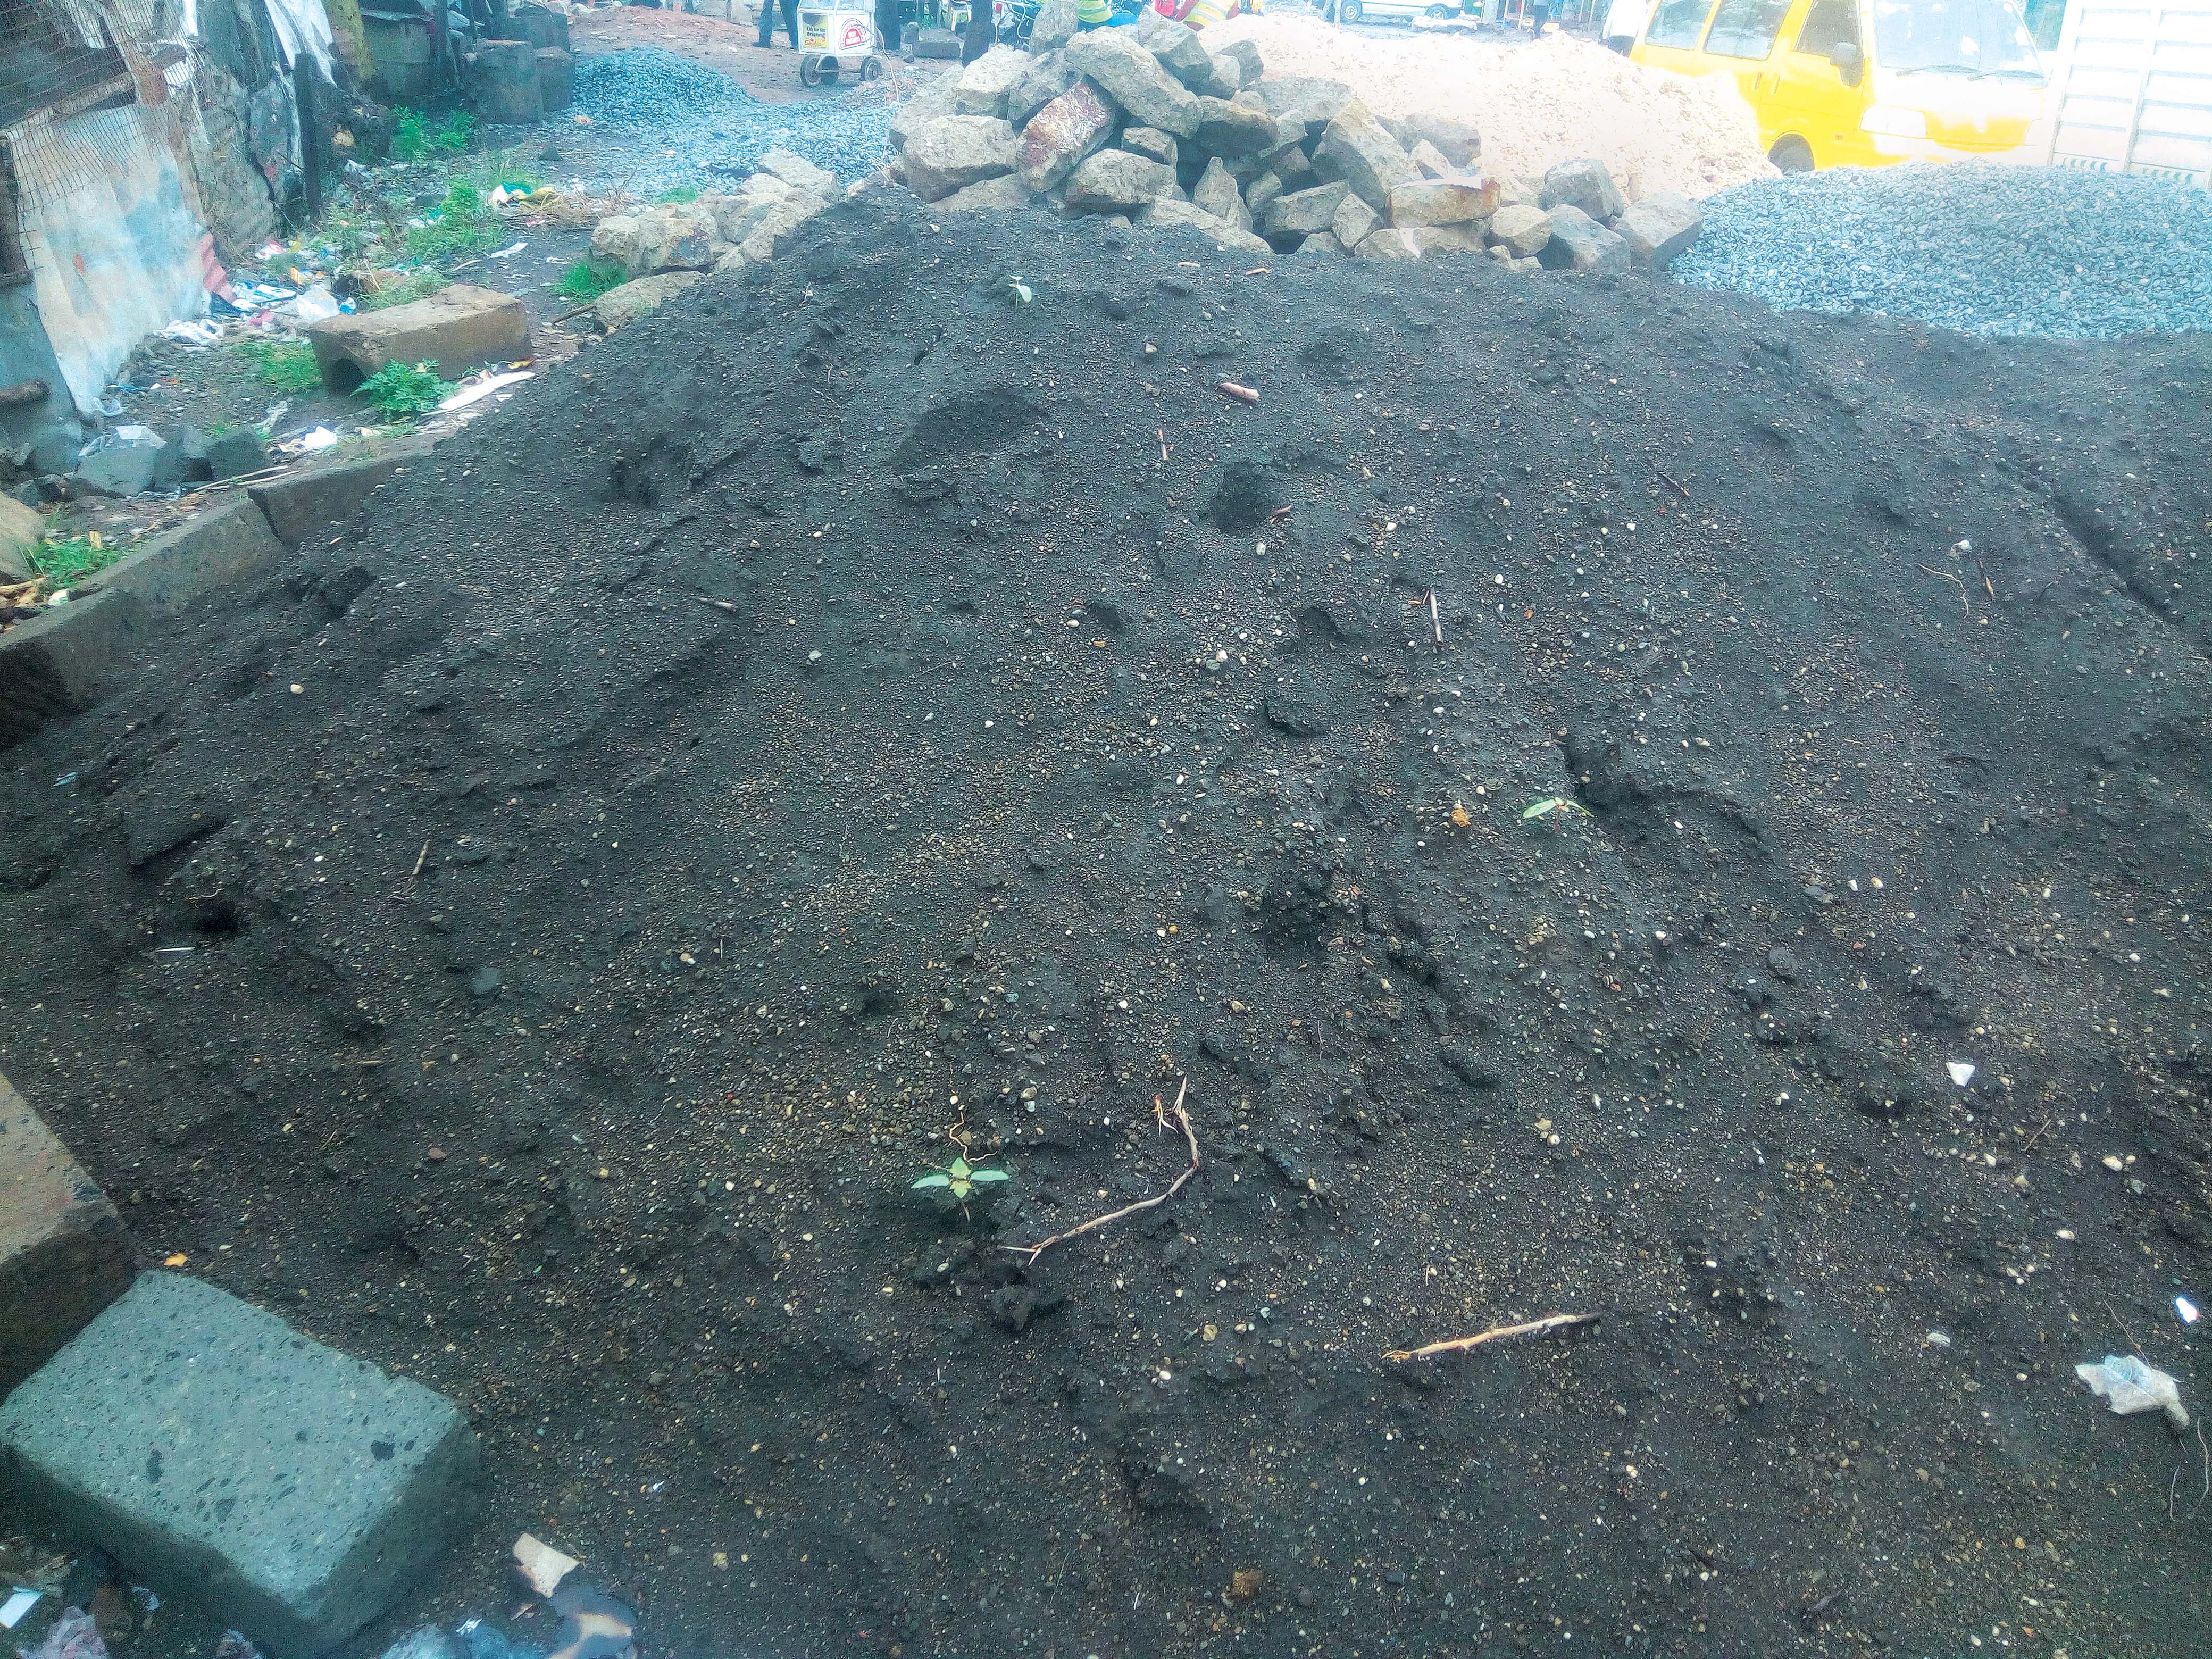 Volcanic black sand at a construction site in Nairobi.jpg